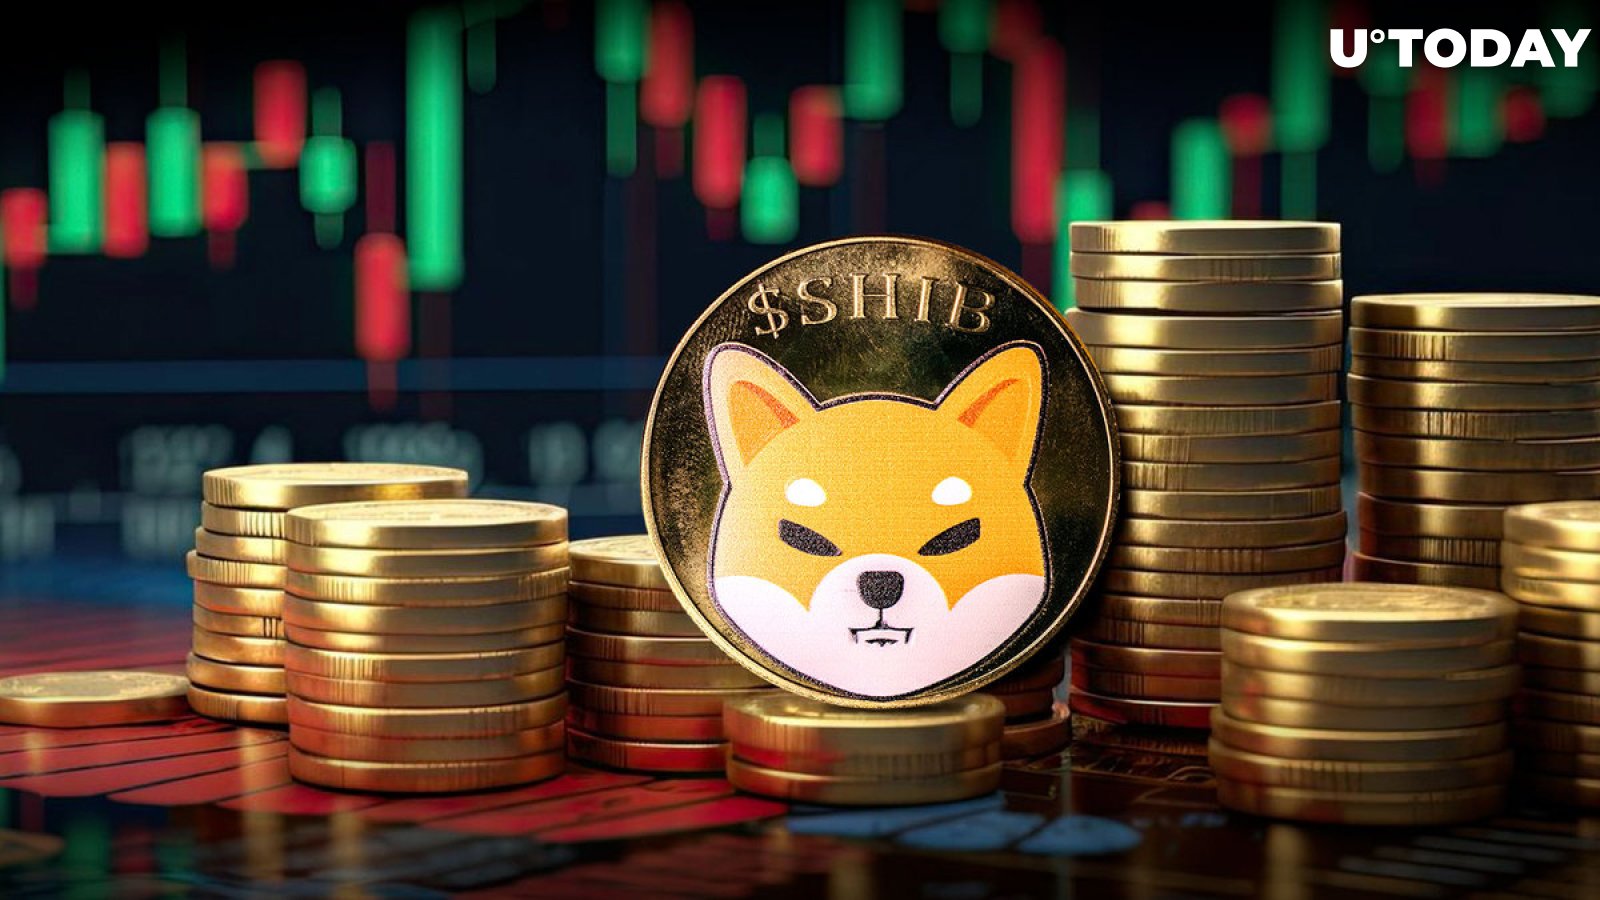 3.7 billion Shiba Inu (SHIB) in 24 hours: What is happening with Meme Token?